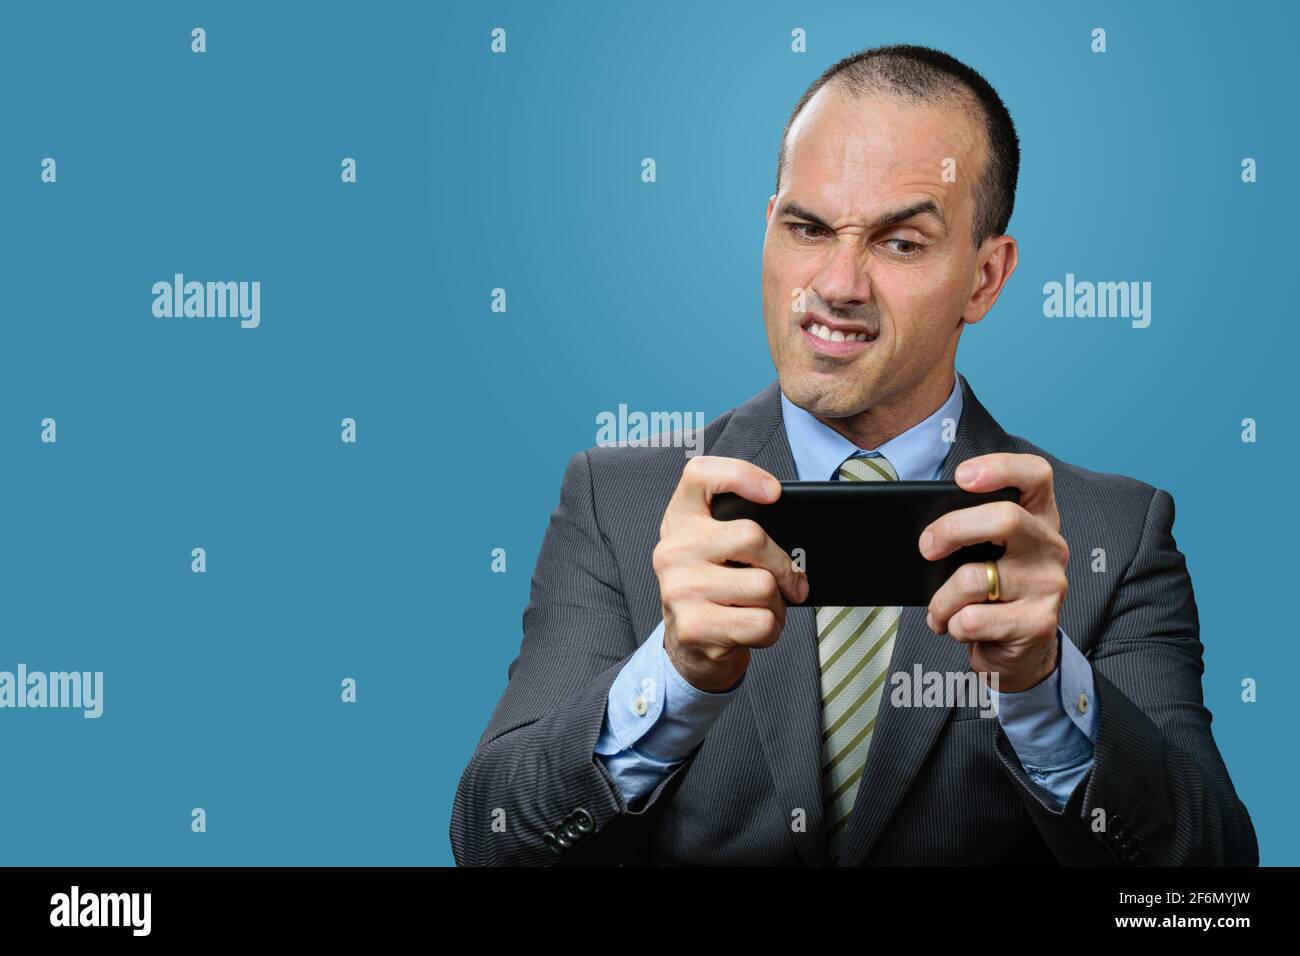 Mature man with suit and tie, playing on his smartphone and making a funny angry face. Blue background. Stock Photo